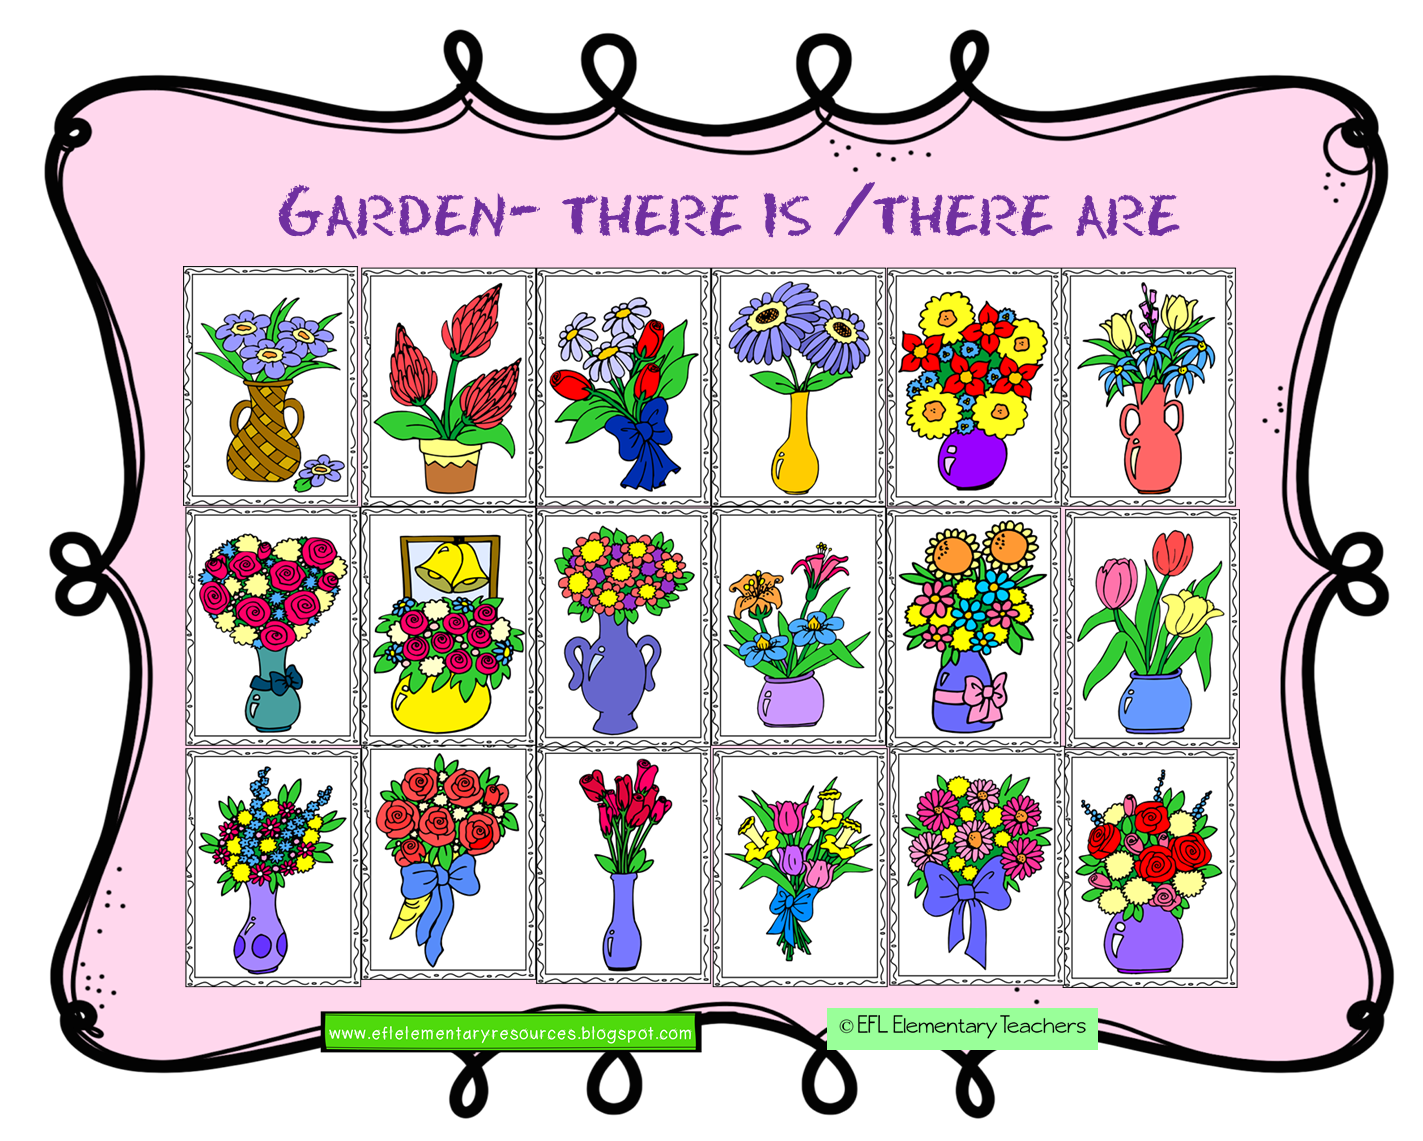 notebook clipart elementary